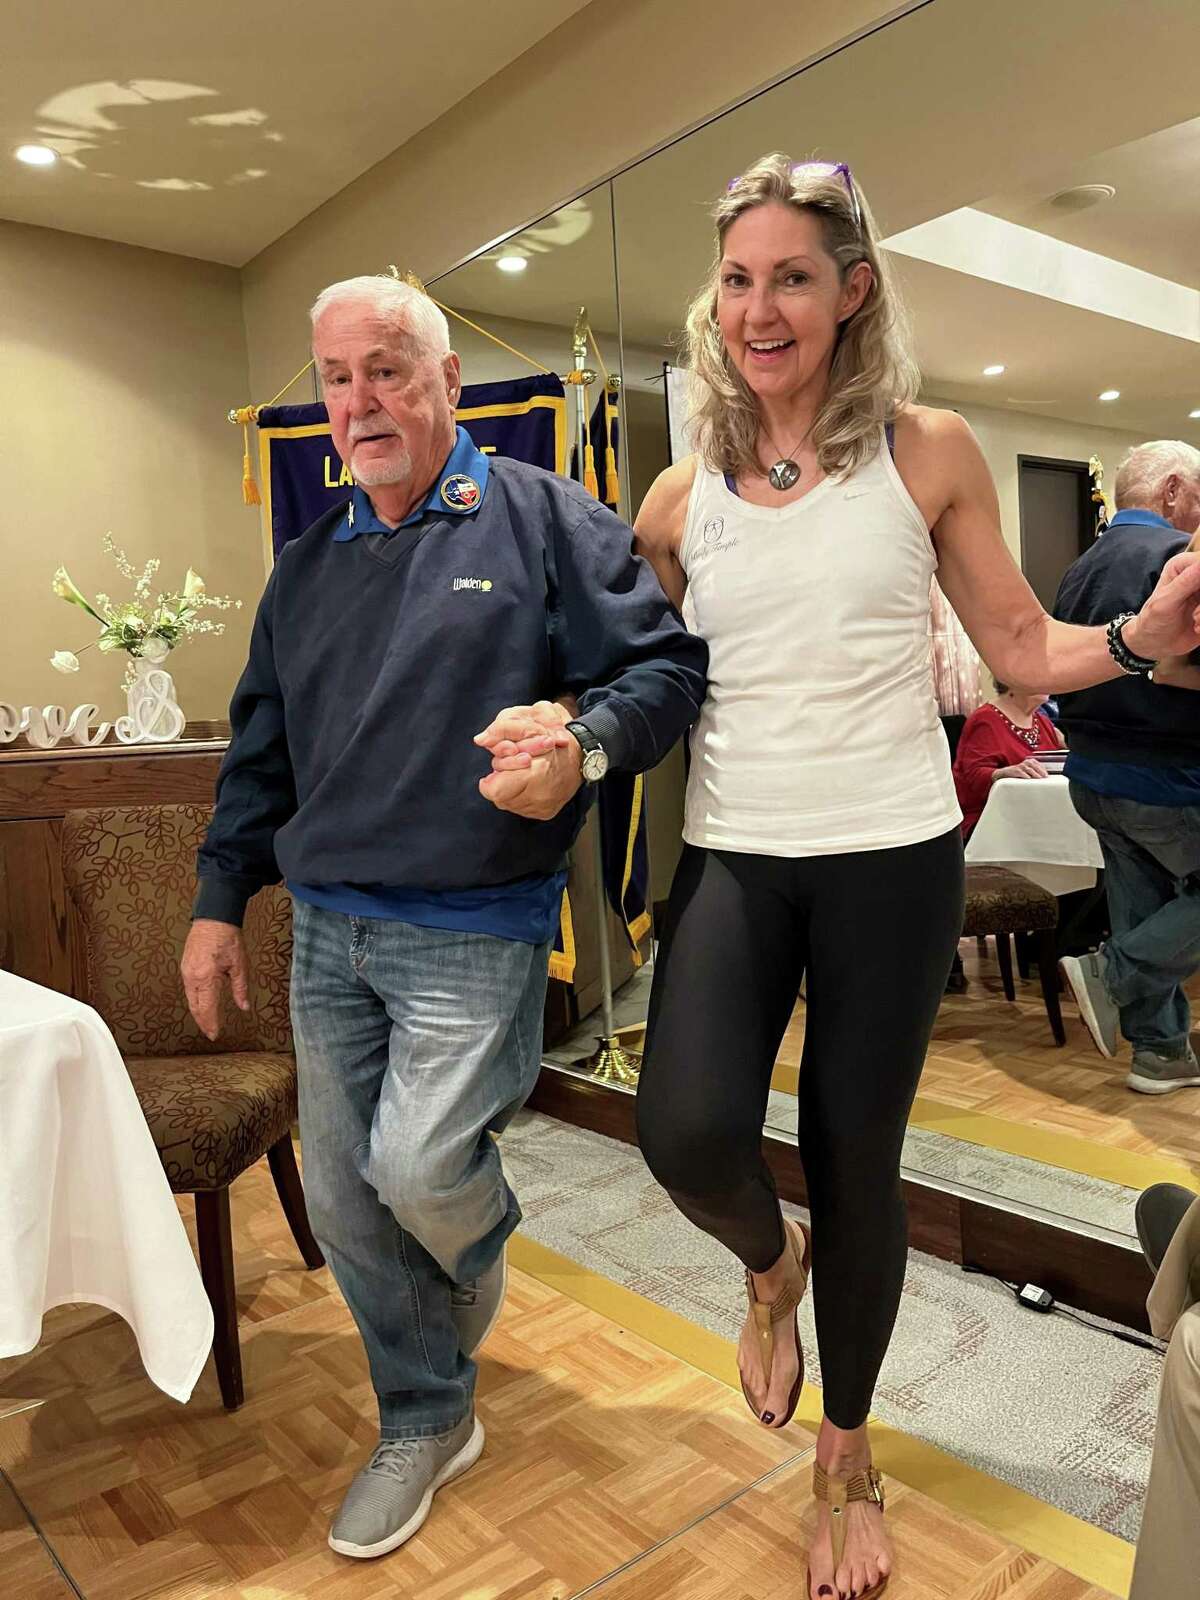 Lake Conroe Centennial Lions Club welcomed Jimmie Lene Read at their last General Meeting who delivered a program entitled "Bringing Balance in 2022". Shown above practicing balancing techniques are LCCLC member Bob Drucker with Jimmie Read.